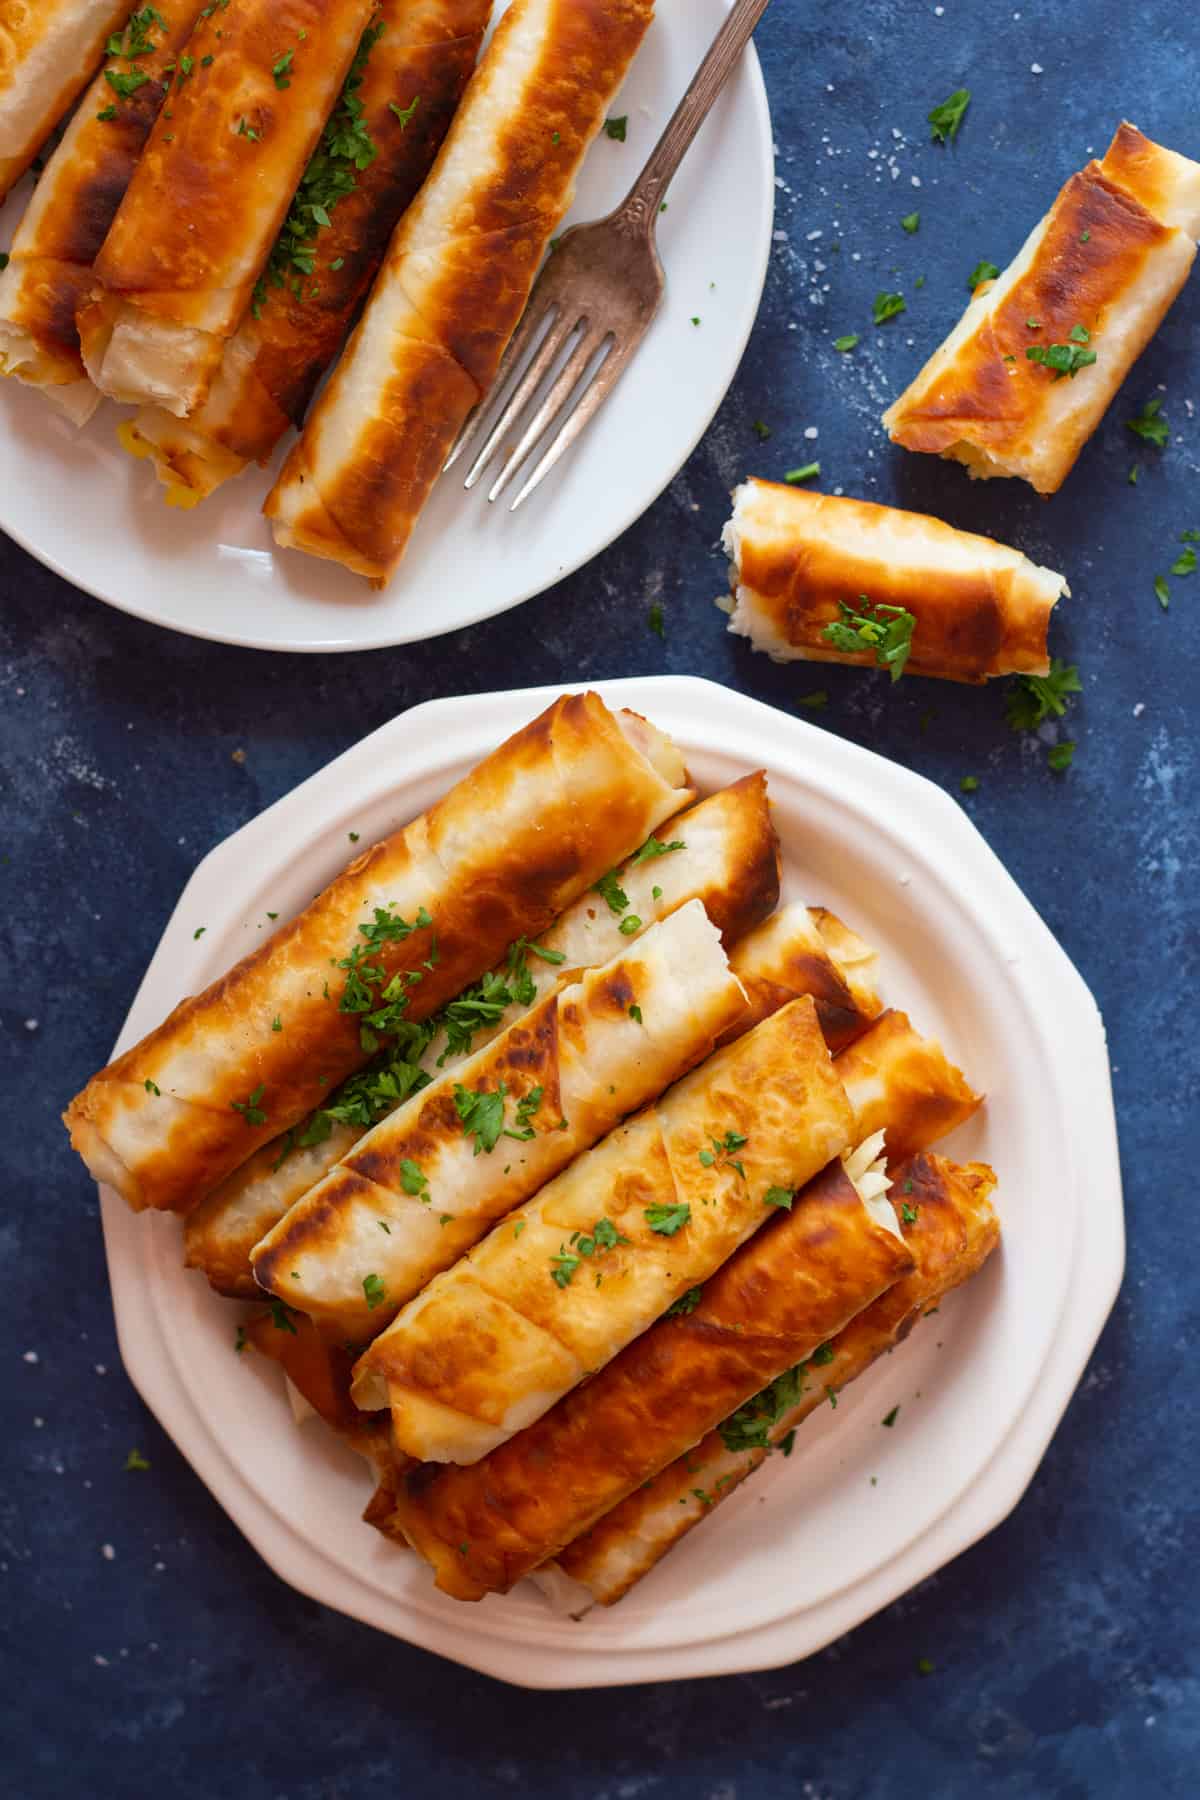 Borek is a Turkish savory crunchy pastry filled with different fillings such as cheese or potatoes. Learn how to make Turkish borek recipe by watching our step-by-step video and tutorial. They are perfect as a midday snack or for breakfast and you can make them in advance and freeze them for later. 